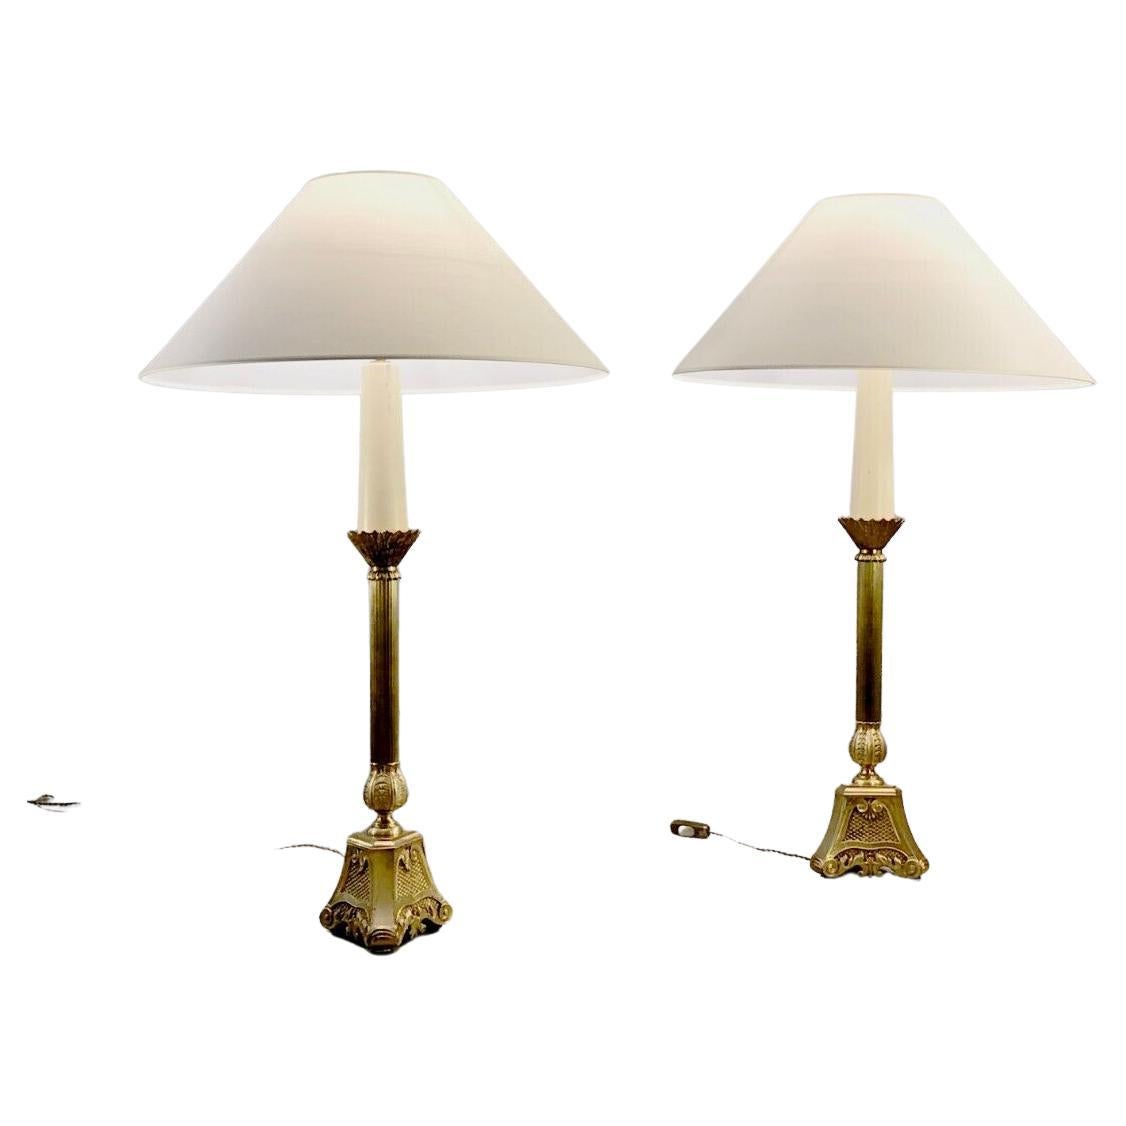 A Pair of LUXURIOUS Bronze NEO-CLASSICAL TABLE LAMPS, France XIX & 1970